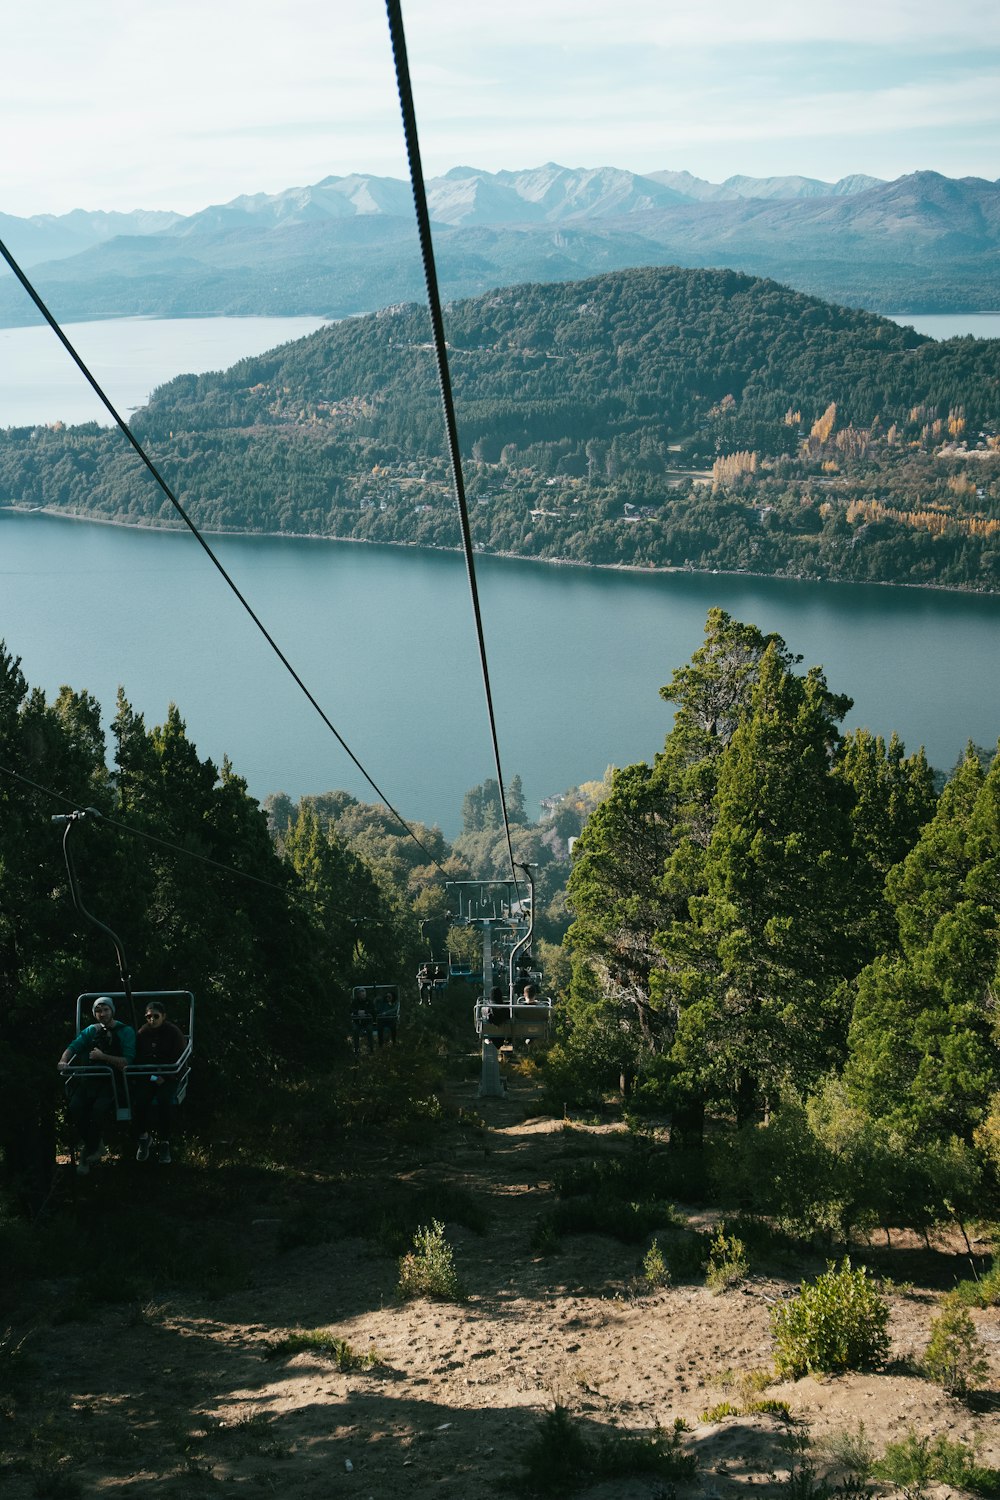 a view of a lake from a ski lift